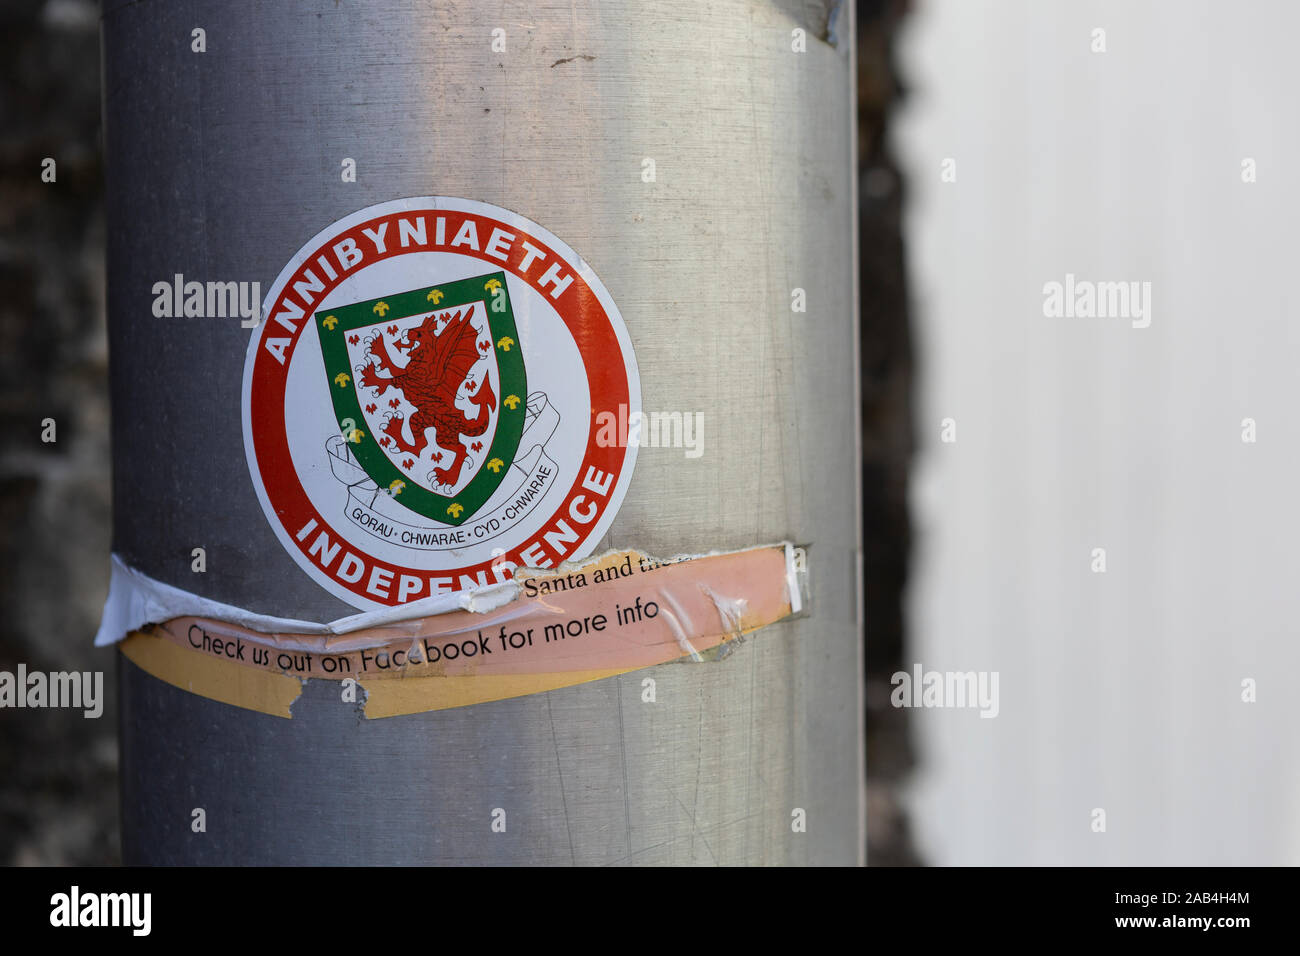 Welsh Football Supporters for Independence sticker on lamp post saying Annibyniaeth / Independence for Wales Stock Photo